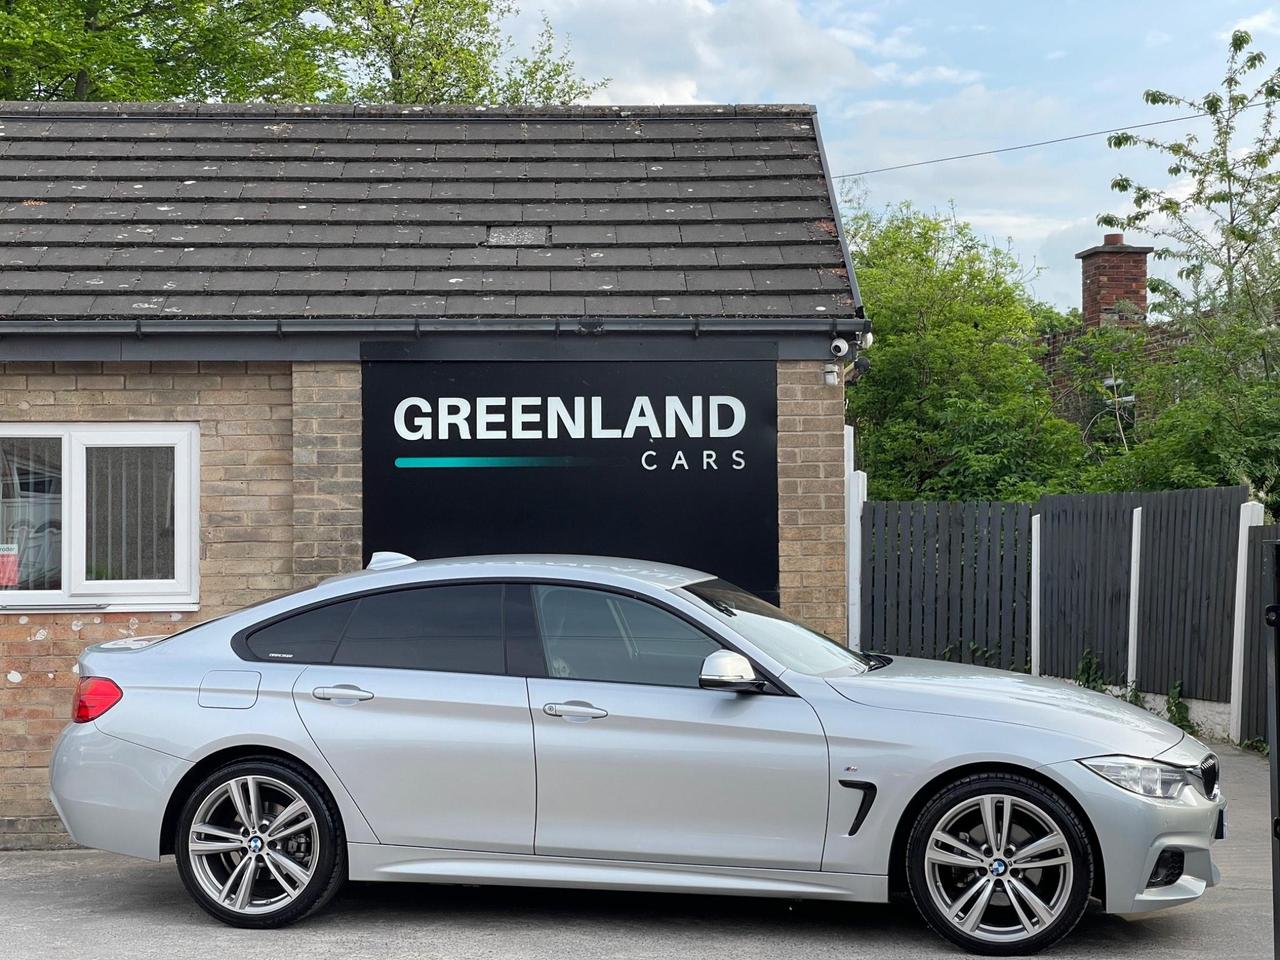 Used 2015 BMW 4 Series Gran Coupe for sale in Sheffield